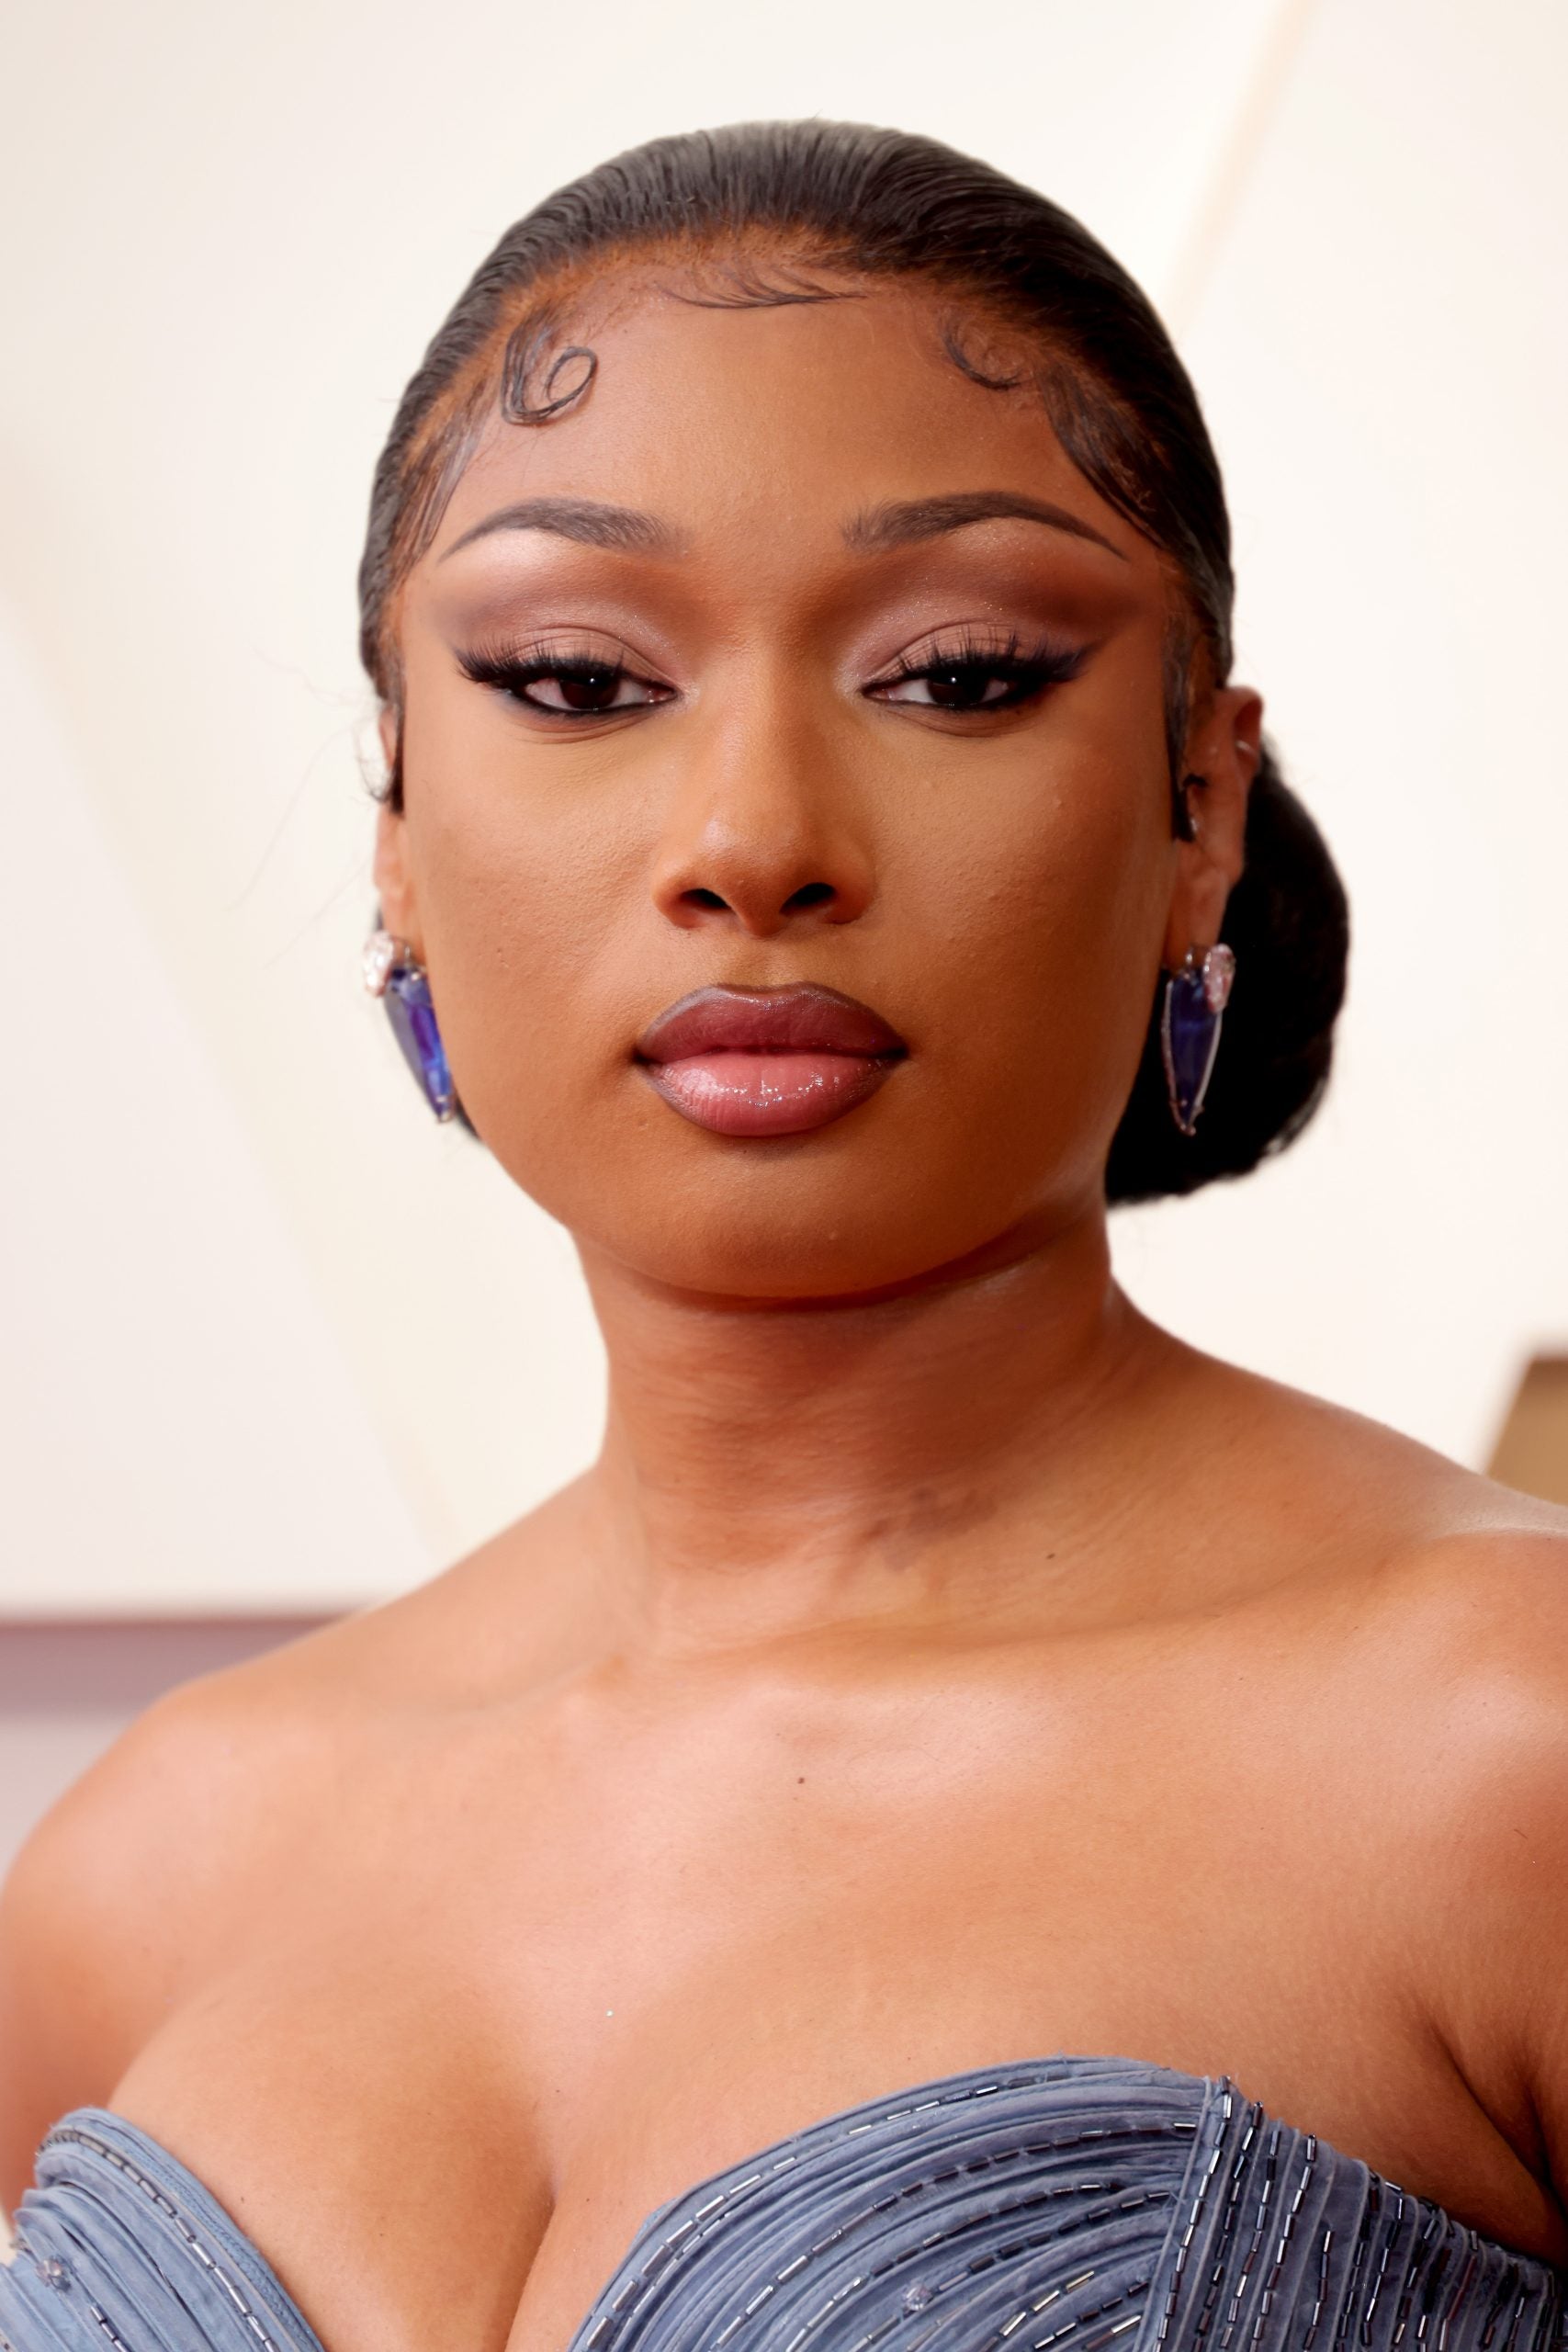 Megan Thee Stallion Details Shooting Incident, Opens Up on Emotional Aftermath